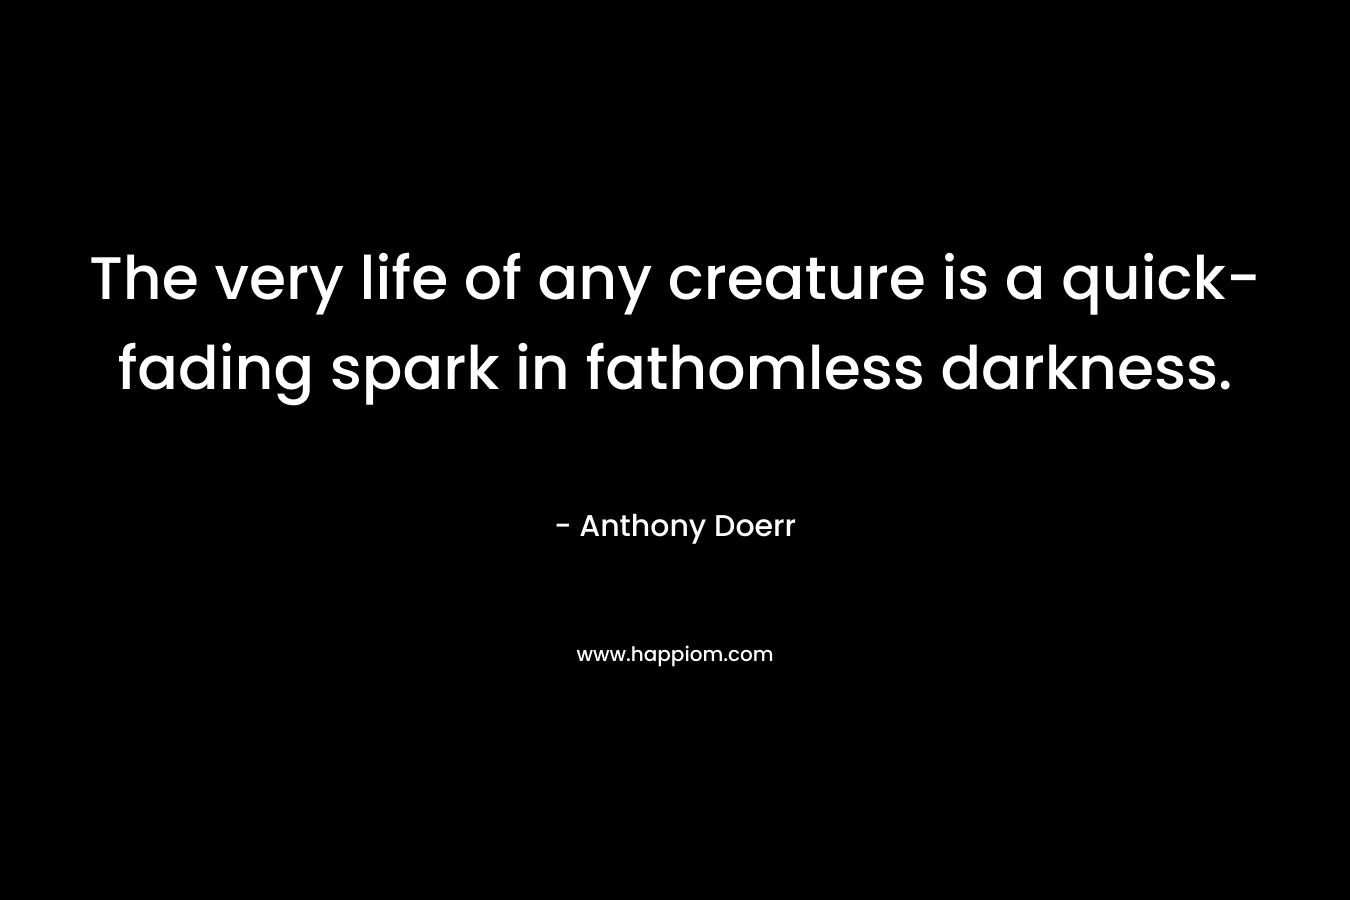 The very life of any creature is a quick-fading spark in fathomless darkness.